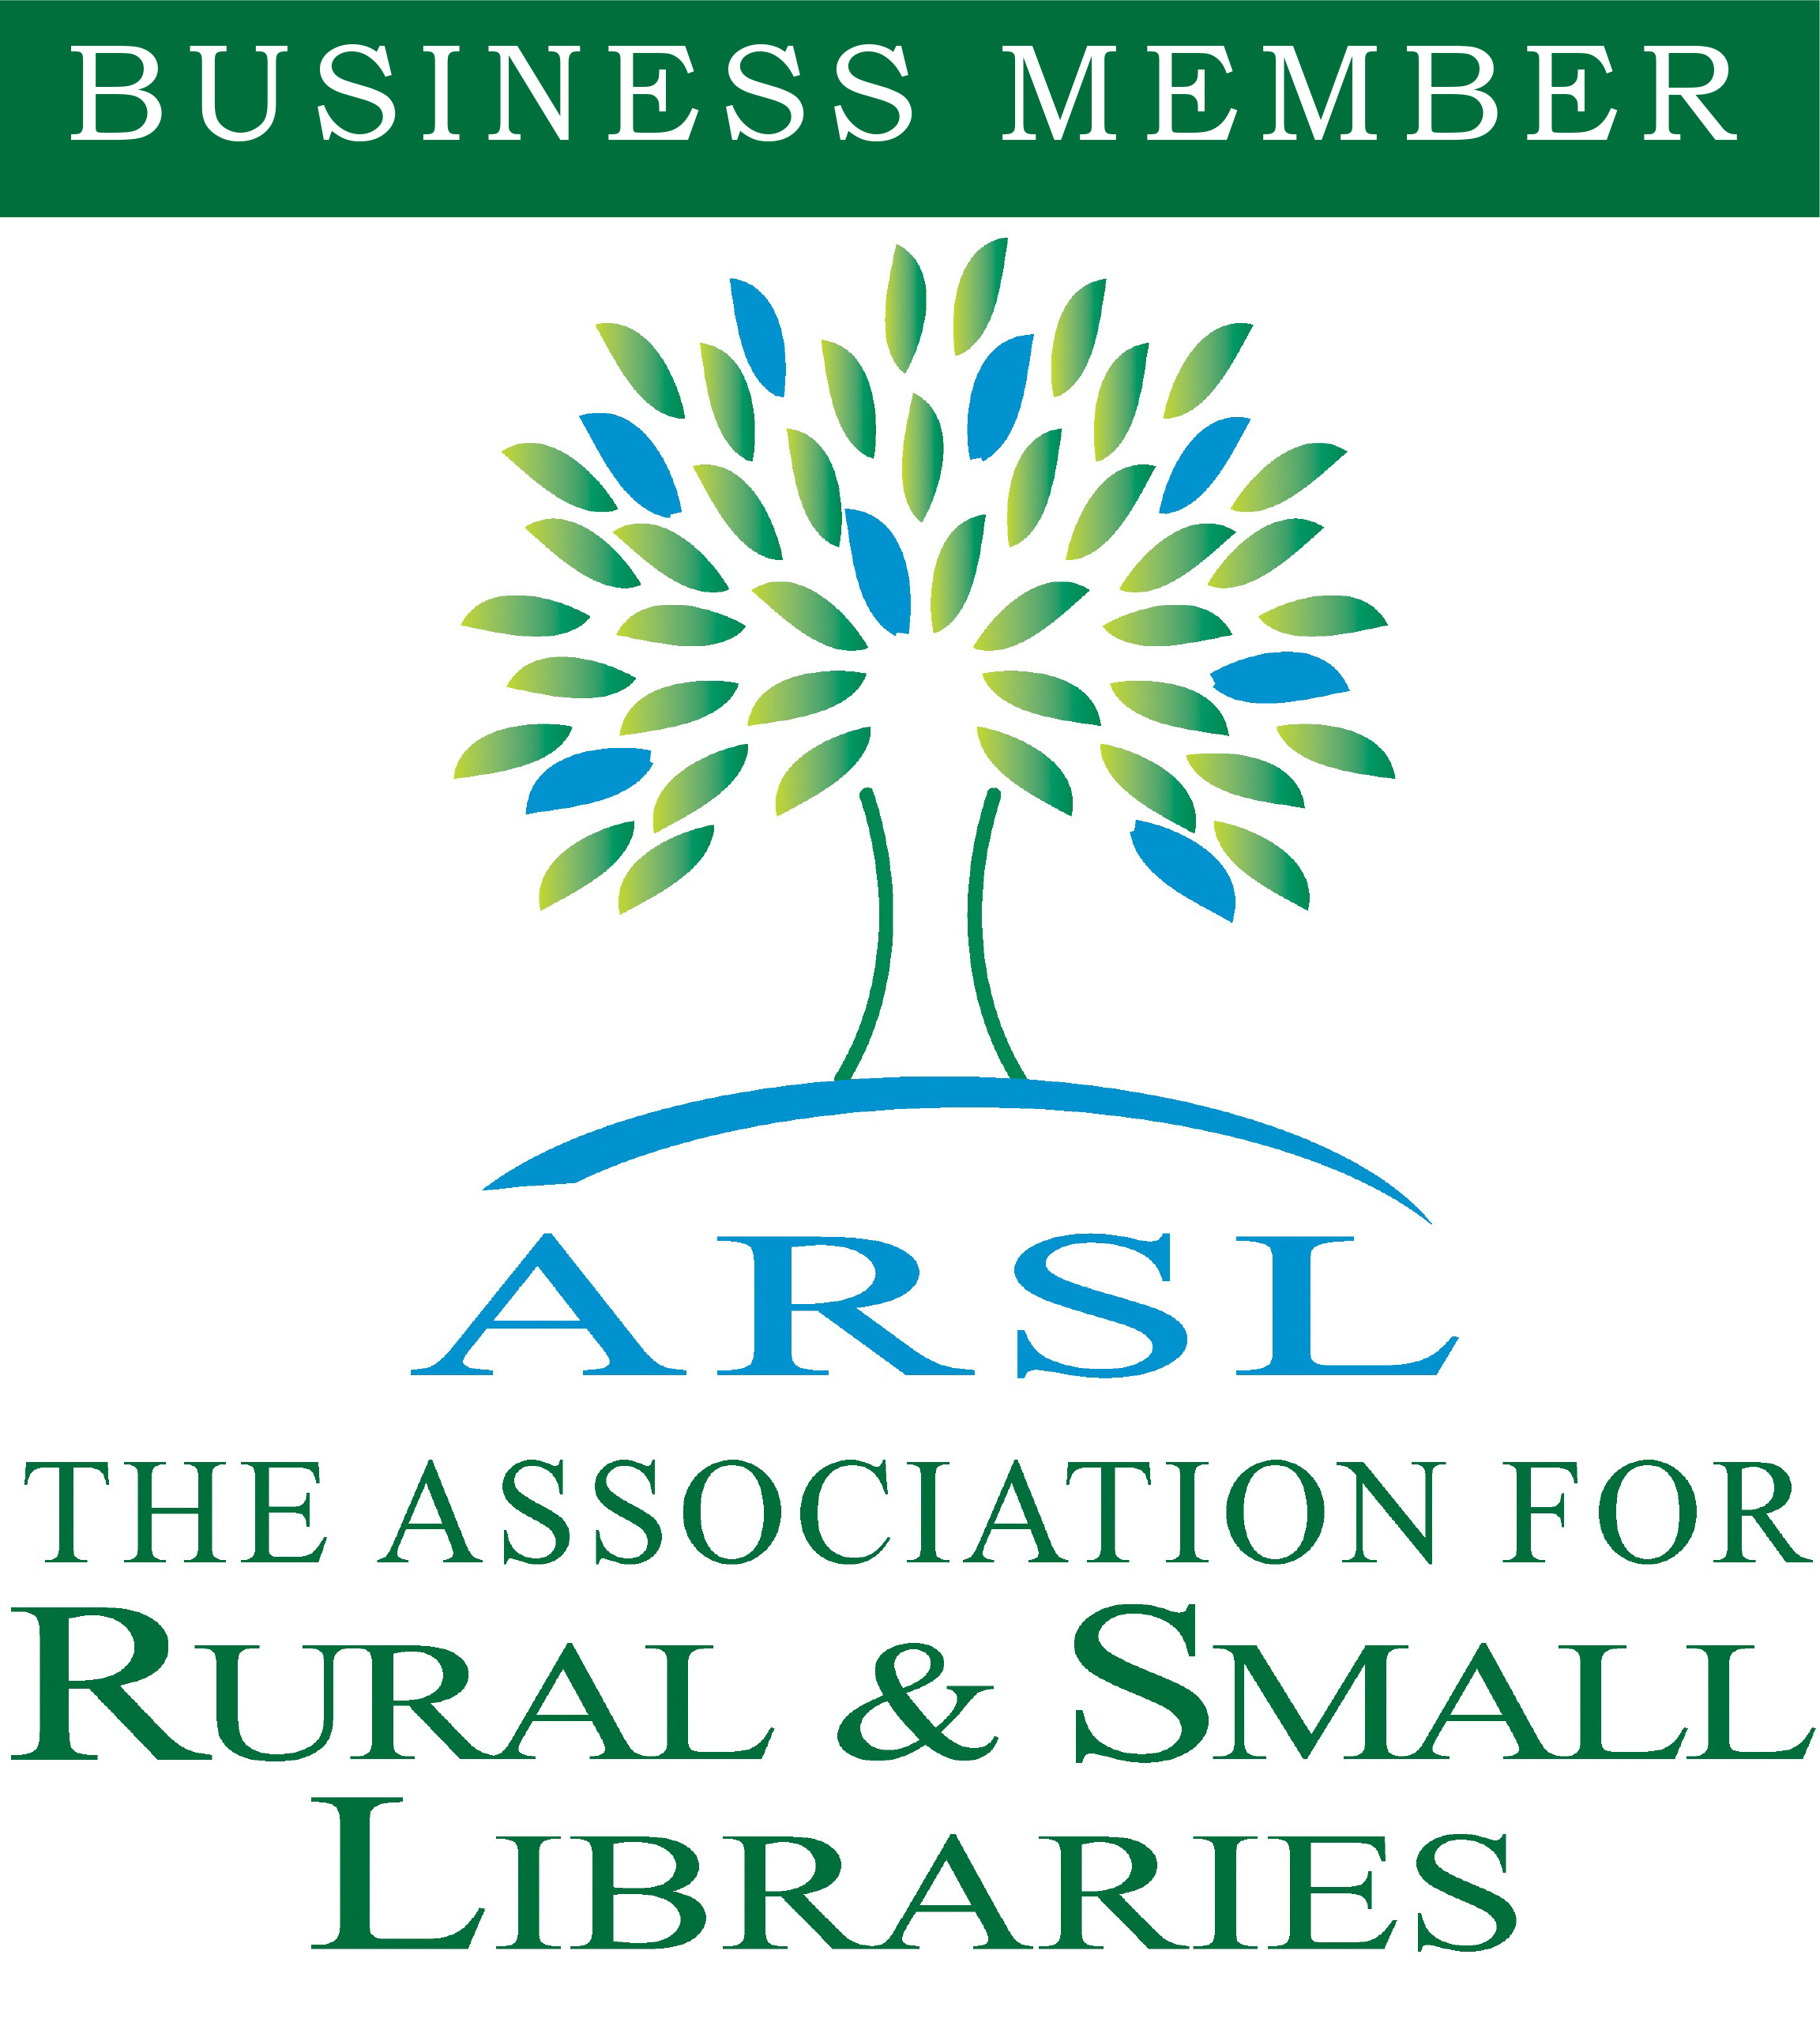 The Association for Rural &amp; Small Libraries